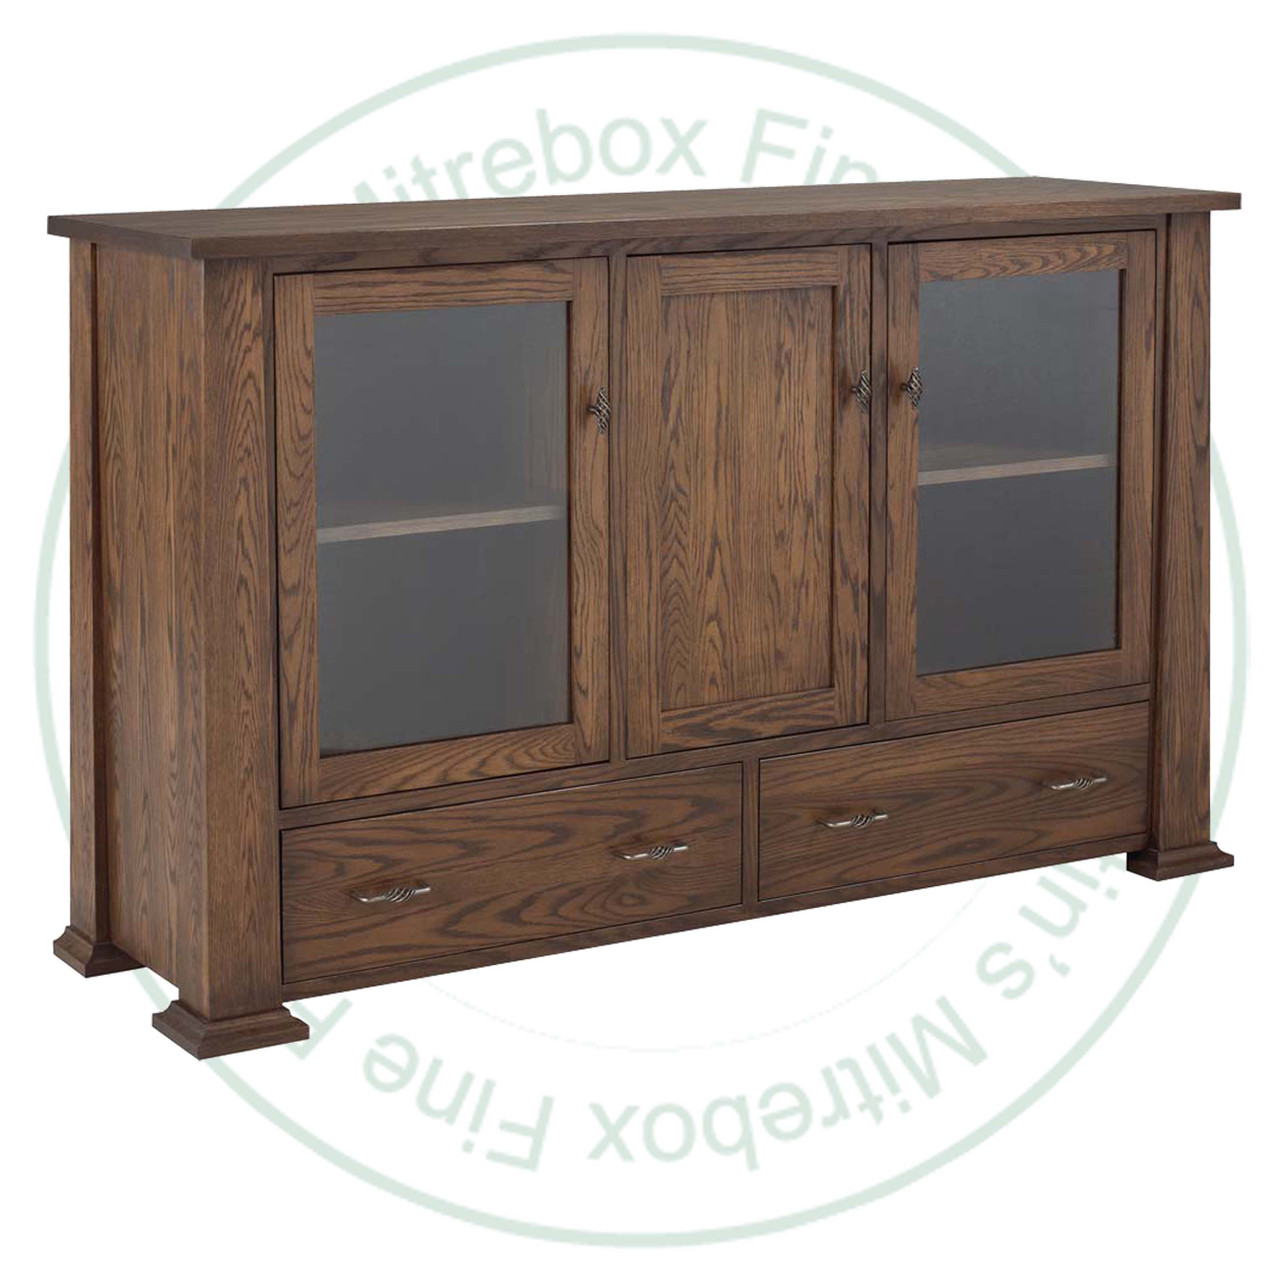 Maple Westminster Sideboard 19''D x 60''W x 40''H